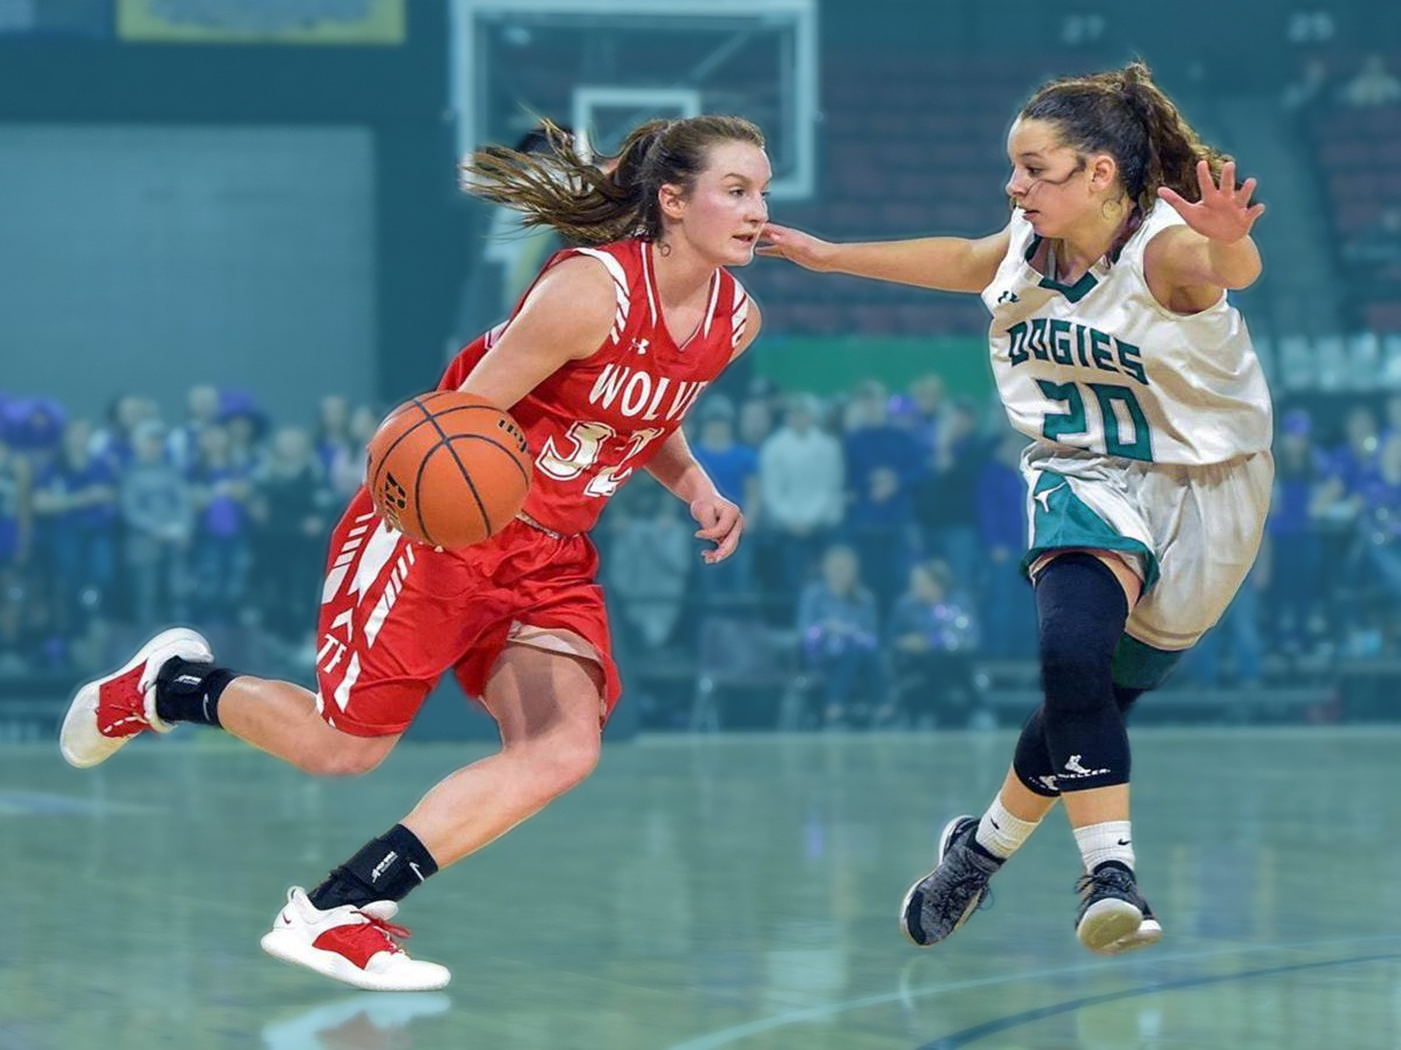 Two girls play basketball, one dribbles the ball while wearing a red jersey. The other wears a white and green jersey and attempts to stop the other player.